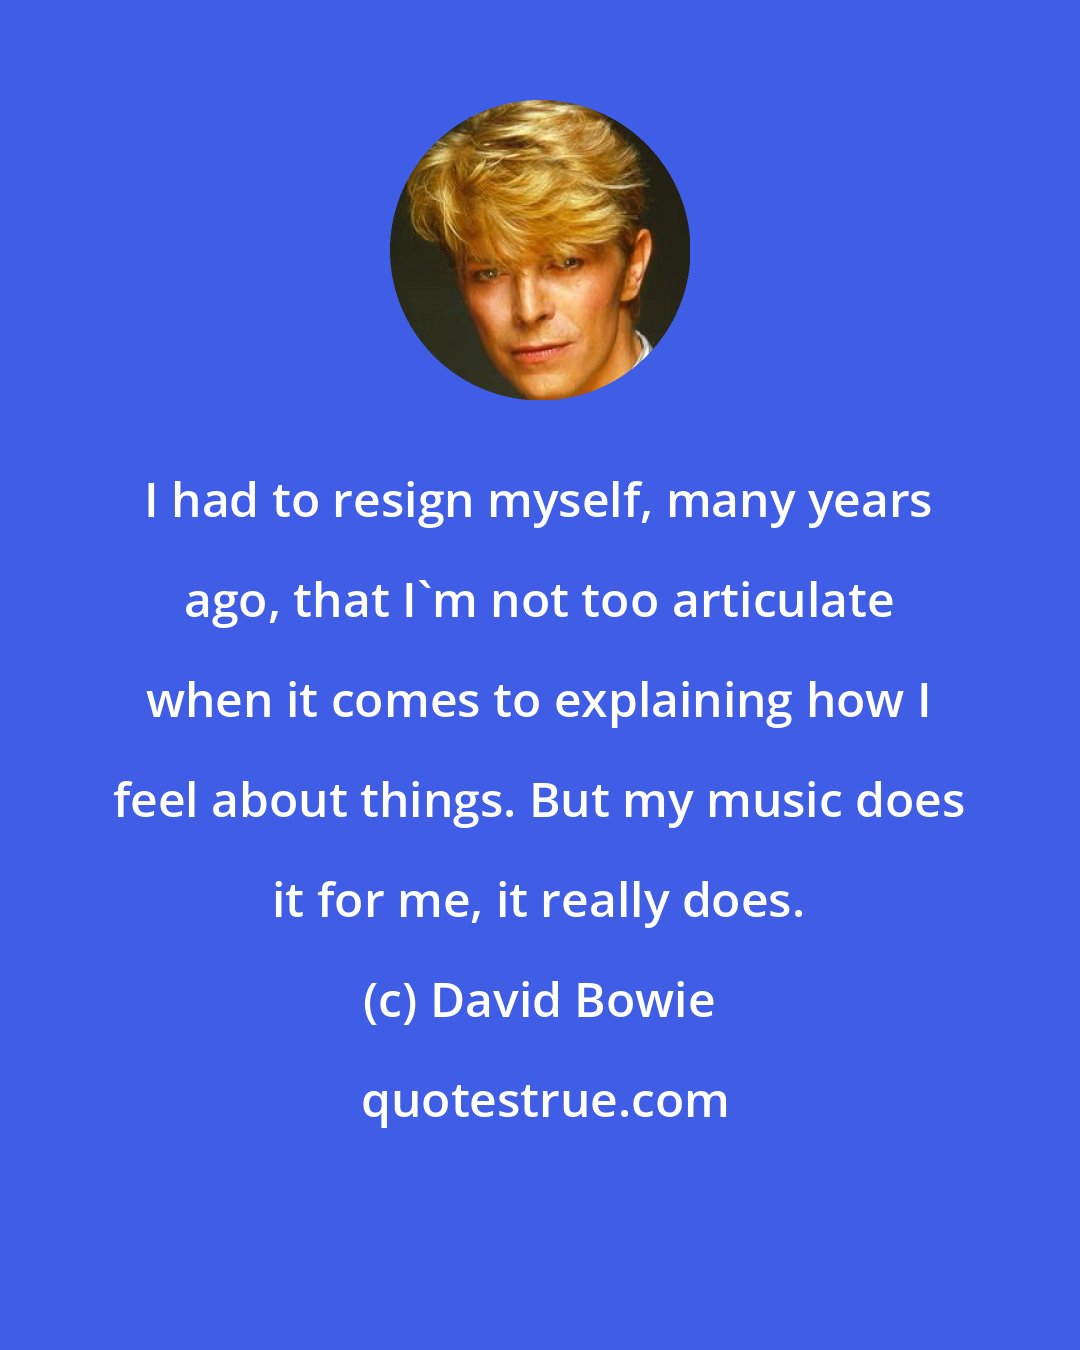 David Bowie: I had to resign myself, many years ago, that I'm not too articulate when it comes to explaining how I feel about things. But my music does it for me, it really does.